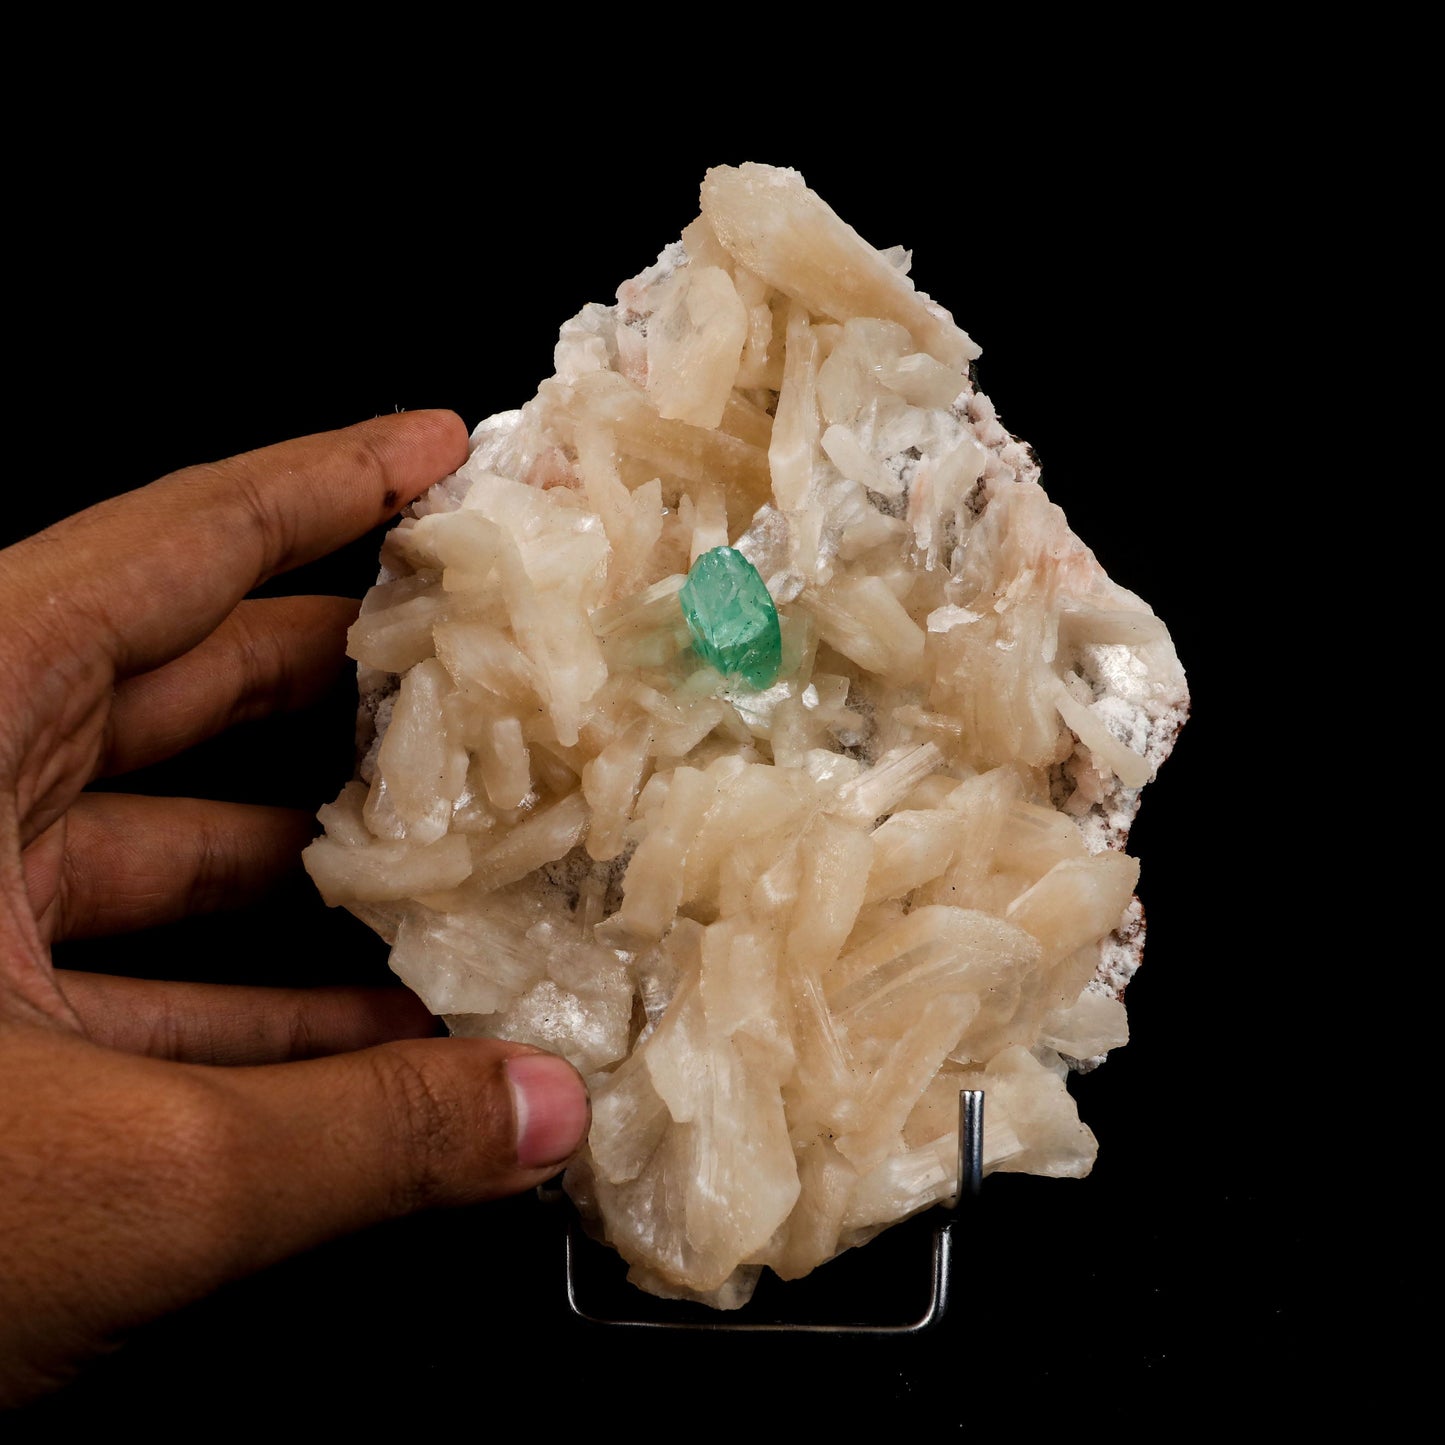 Green Apophyllite with Stilbite Natural Mineral Specimen # B 4995  https://www.superbminerals.us/products/green-apophyllite-with-stilbite-natural-mineral-specimen-b-4995  Features:&nbsp;Transparent green apophyllite crystals long with lustrous crystal faces and steep pyramidal terminations on matrix coated with lustrous peach-baggie coloured Stilbite crystals of varying sizes. Primary Mineral(s): ApophylliteSecondary Mineral(s): StilbiteMatrix: N/A 7 Inch x 5 InchWeight : 968 